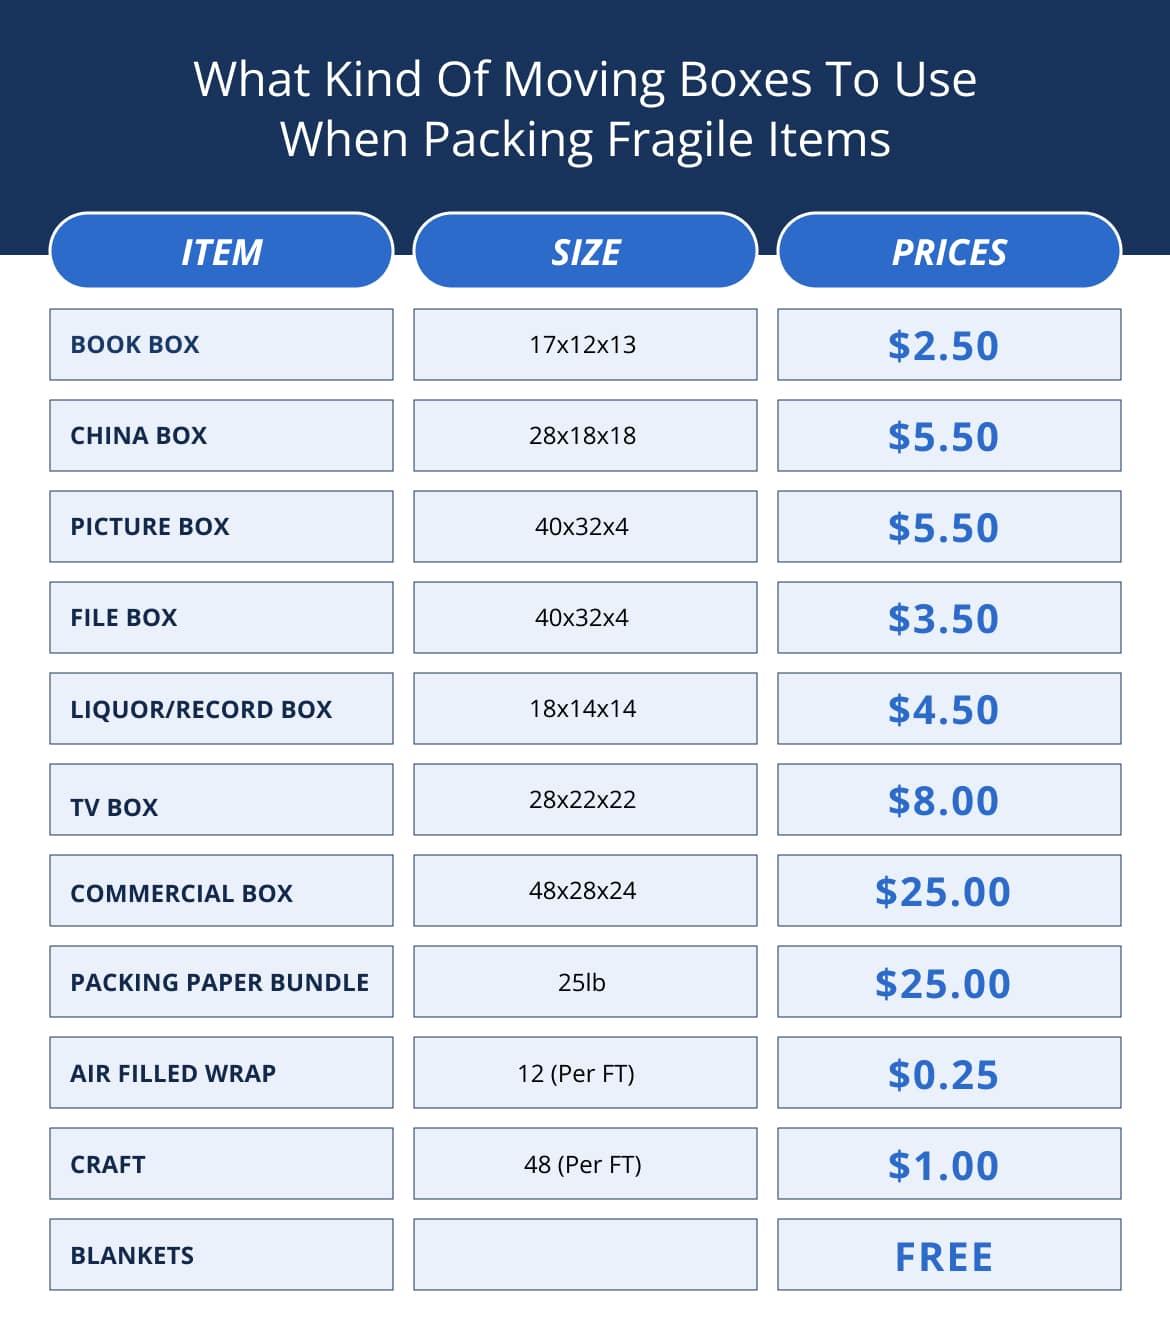 infographic about moving boxes to use if you want to organize your home storage space after moving to Coconut Grove, especially for fragile items.